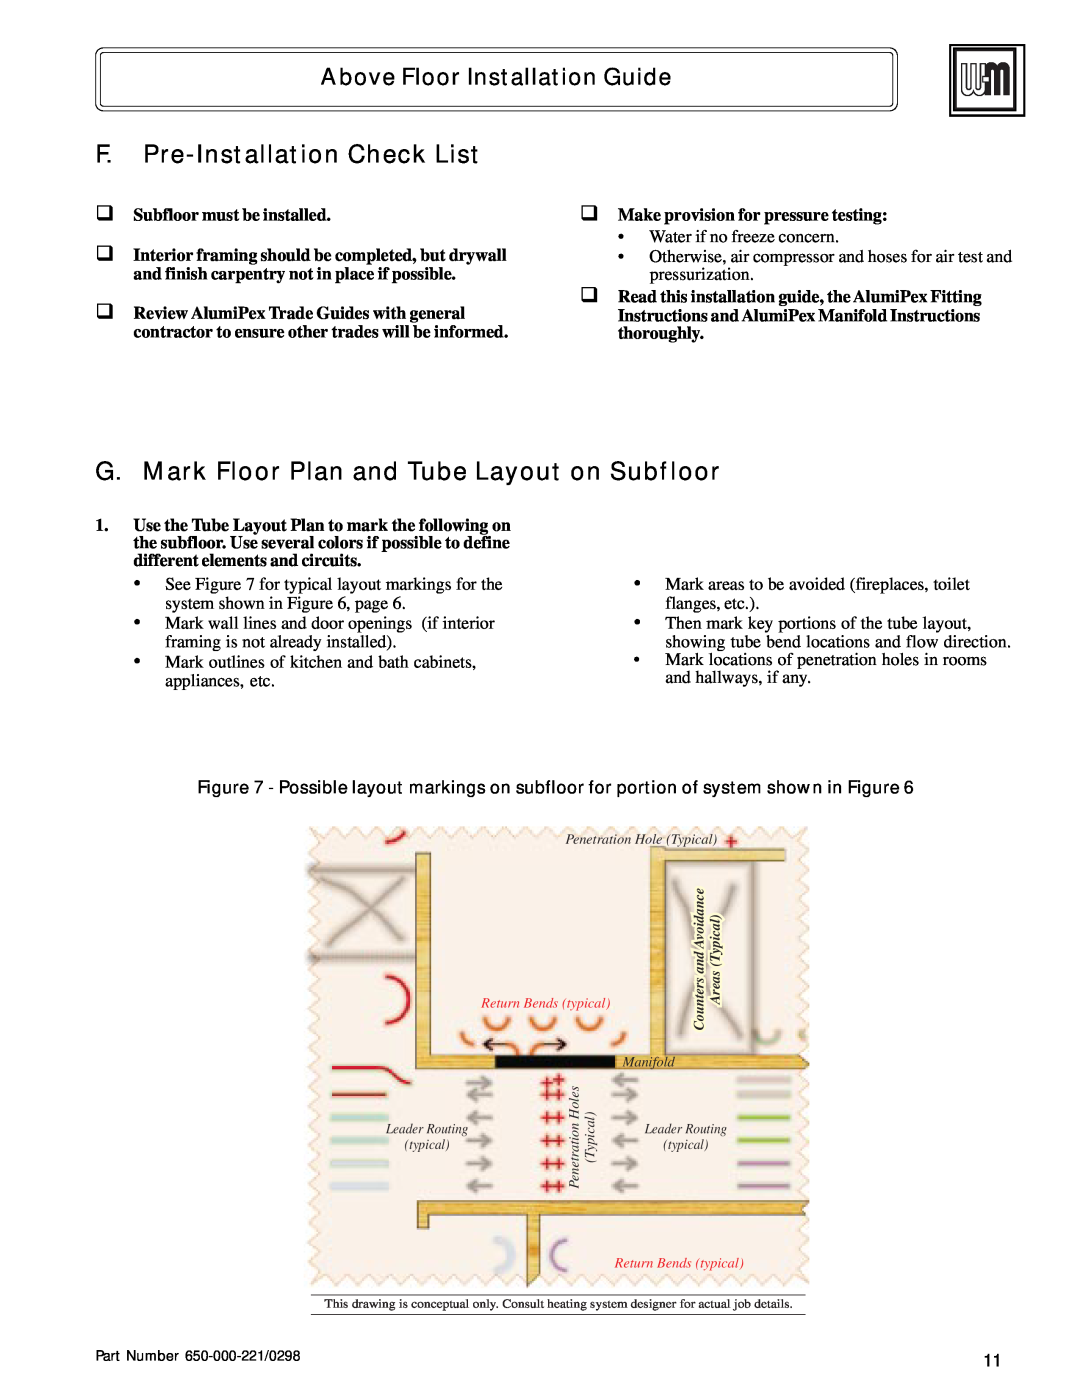 Weil-McLain Radiant Heater manual F.Pre-InstallationCheck List, G. Mark Floor Plan and Tube Layout on Subfloor 